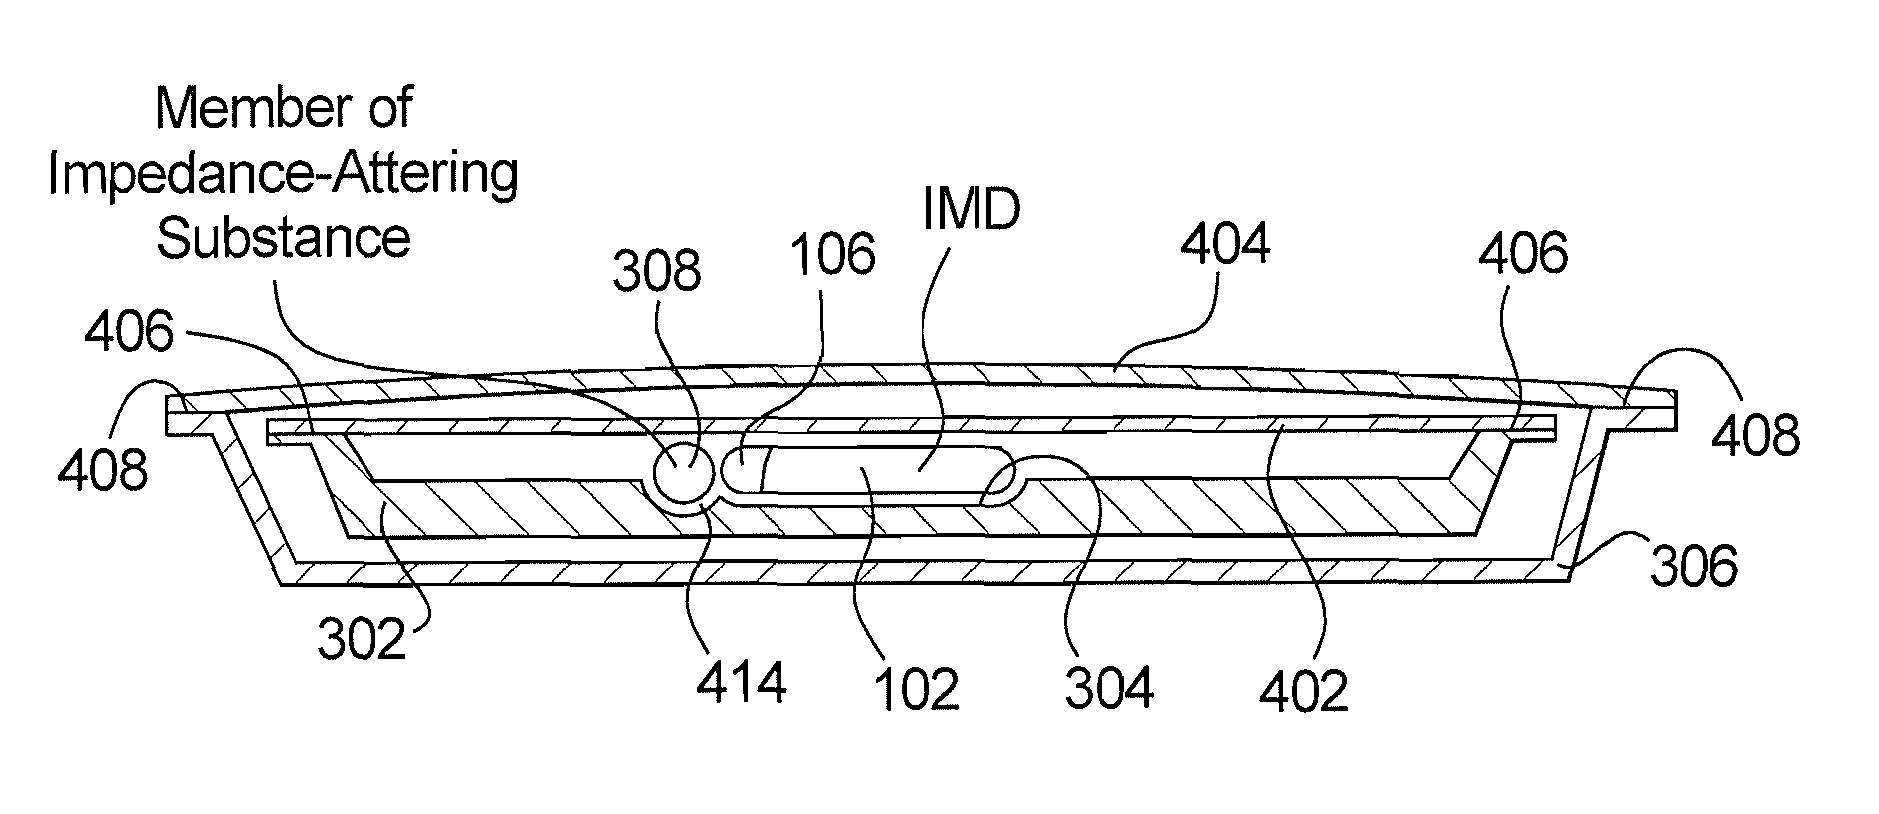 Container for storing an implantable medical device and a method for packaging such a device